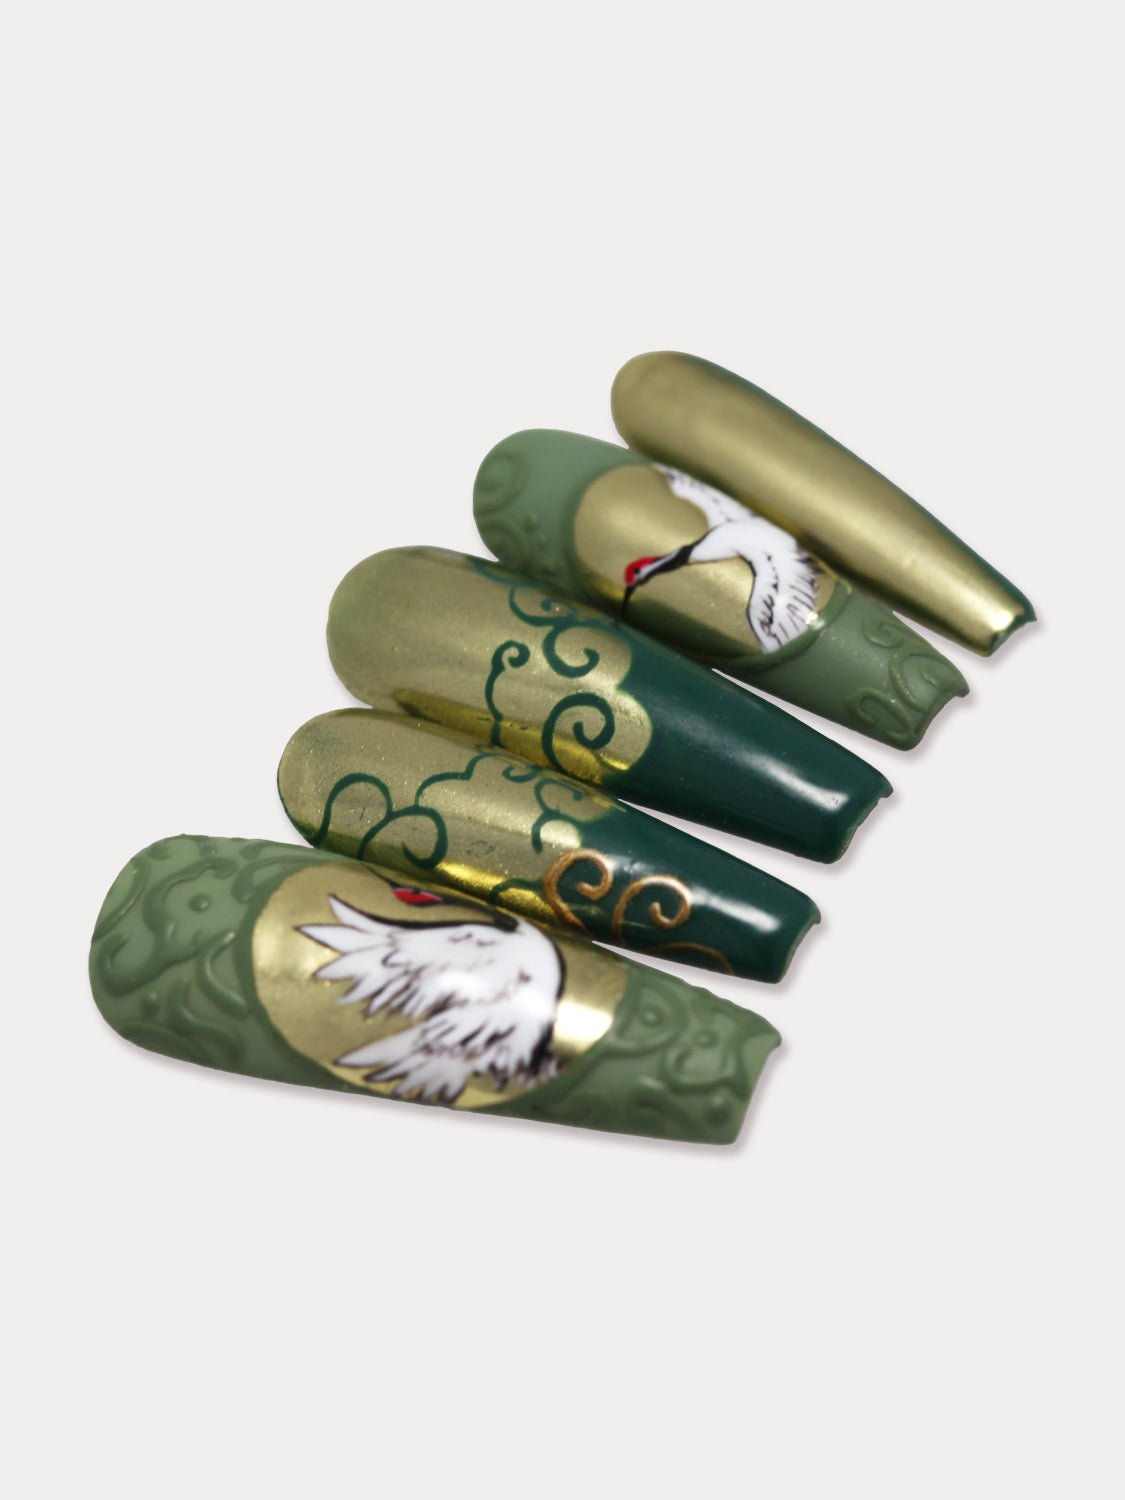 MIEAP Crane press on nail set is a Chinese-inspired design. It showcases a traditional Chinese green color, golden auspicious cloud patter and hand-painted Chinese classical crane design. #MIEAP #MIEAPnails #pressonnail #falsenail #acrylicnail #nails #nailart #naildesign #nailinspo #handmadenail #nail2023 #chinesestylenail #longnail #coffinnail #goldnail